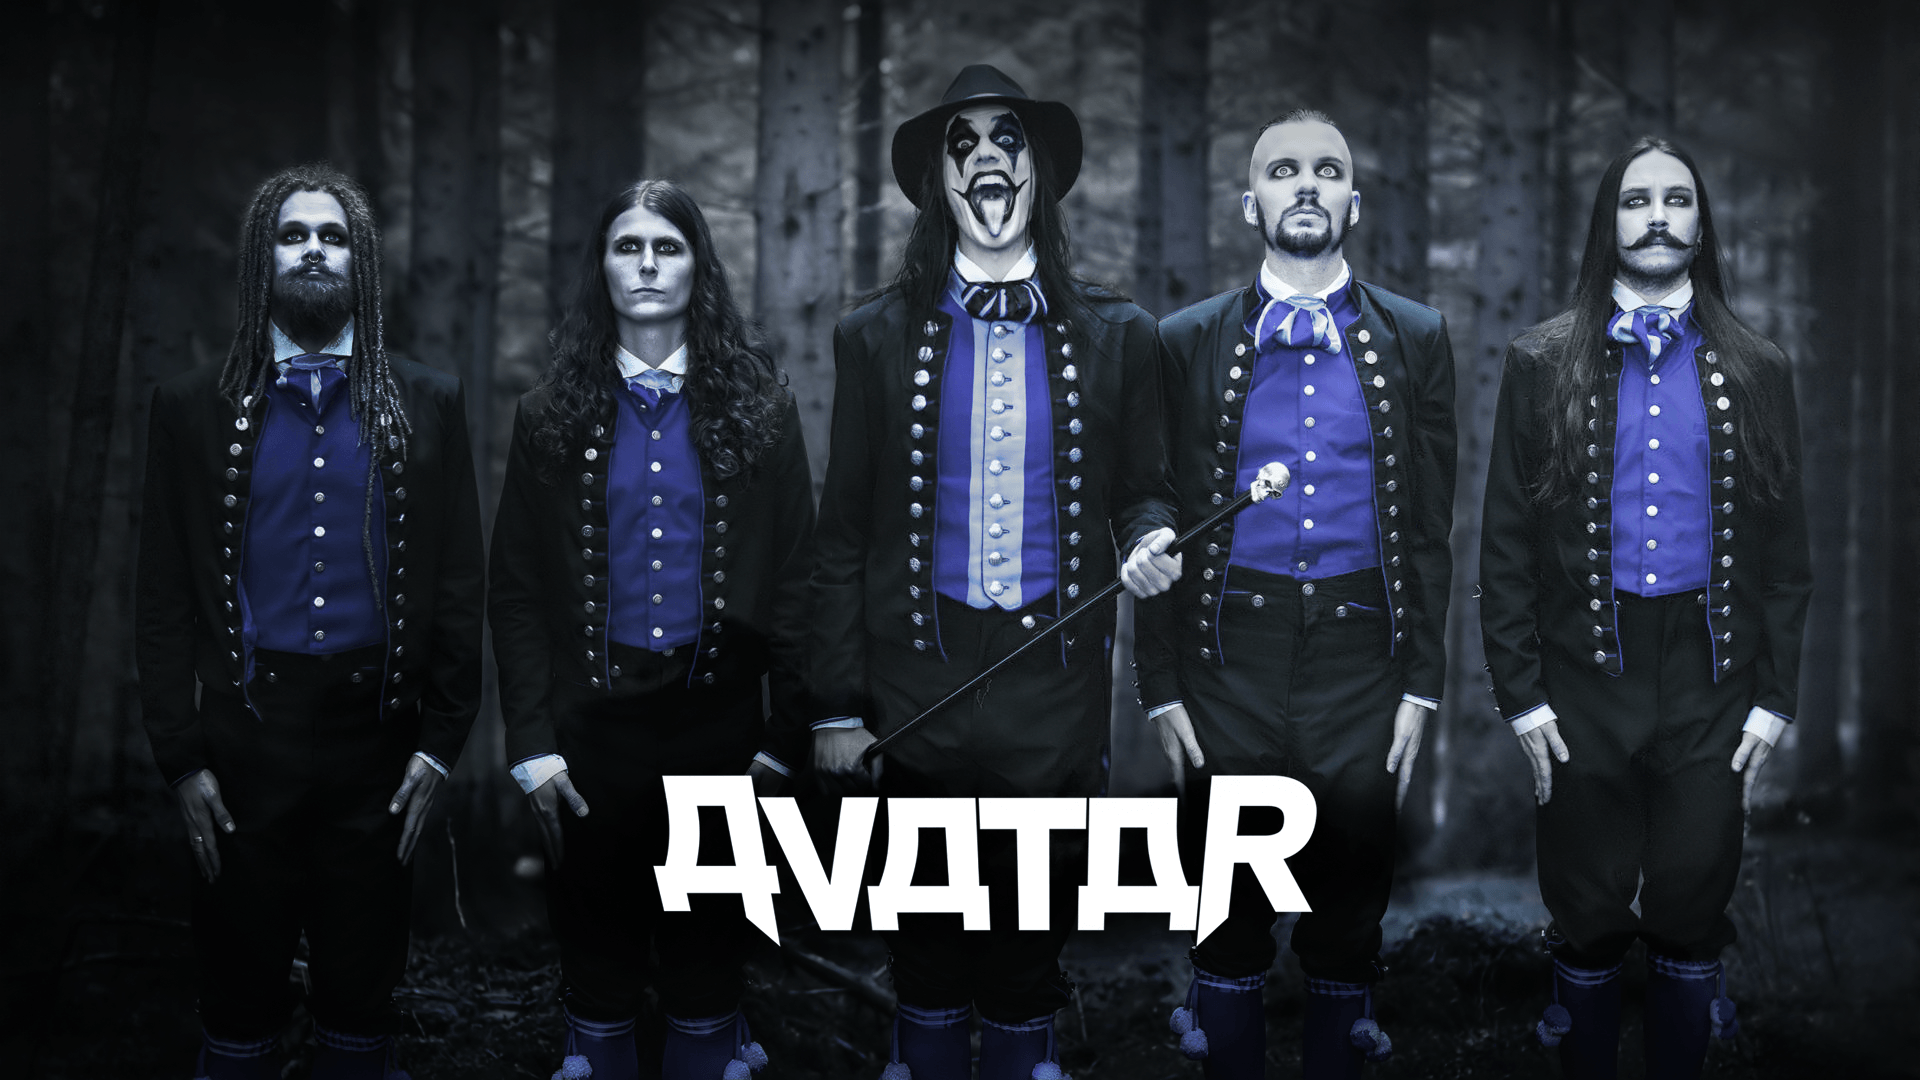 This is an Avatar Metal background I made. Band Wallpaper